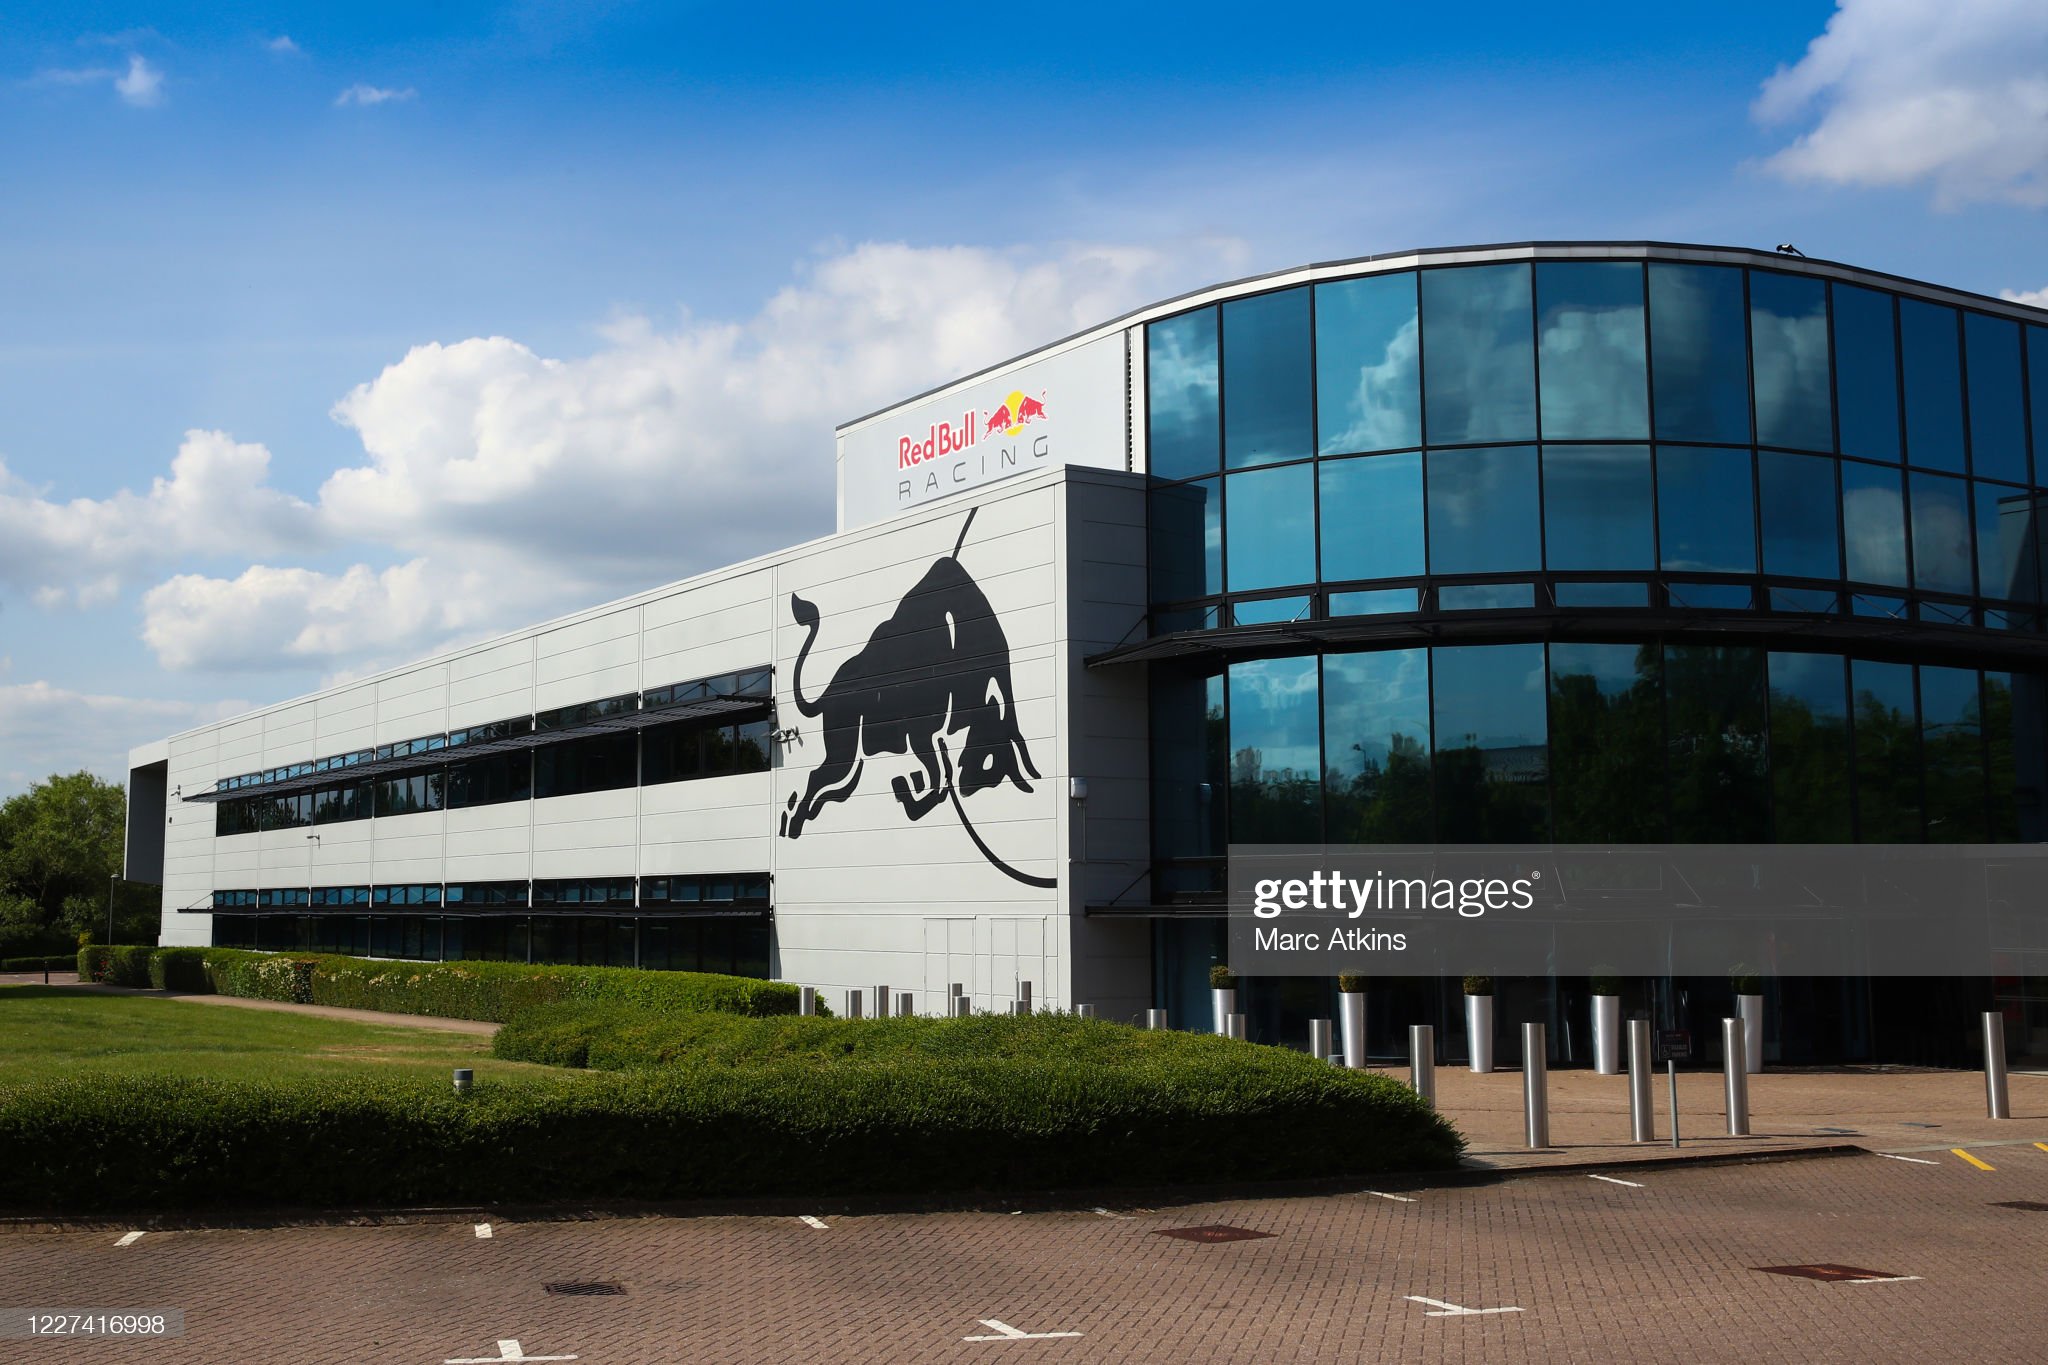 A general view of the Red Bull F1 Racing team headquarters in Milton Keynes, United Kingdom.